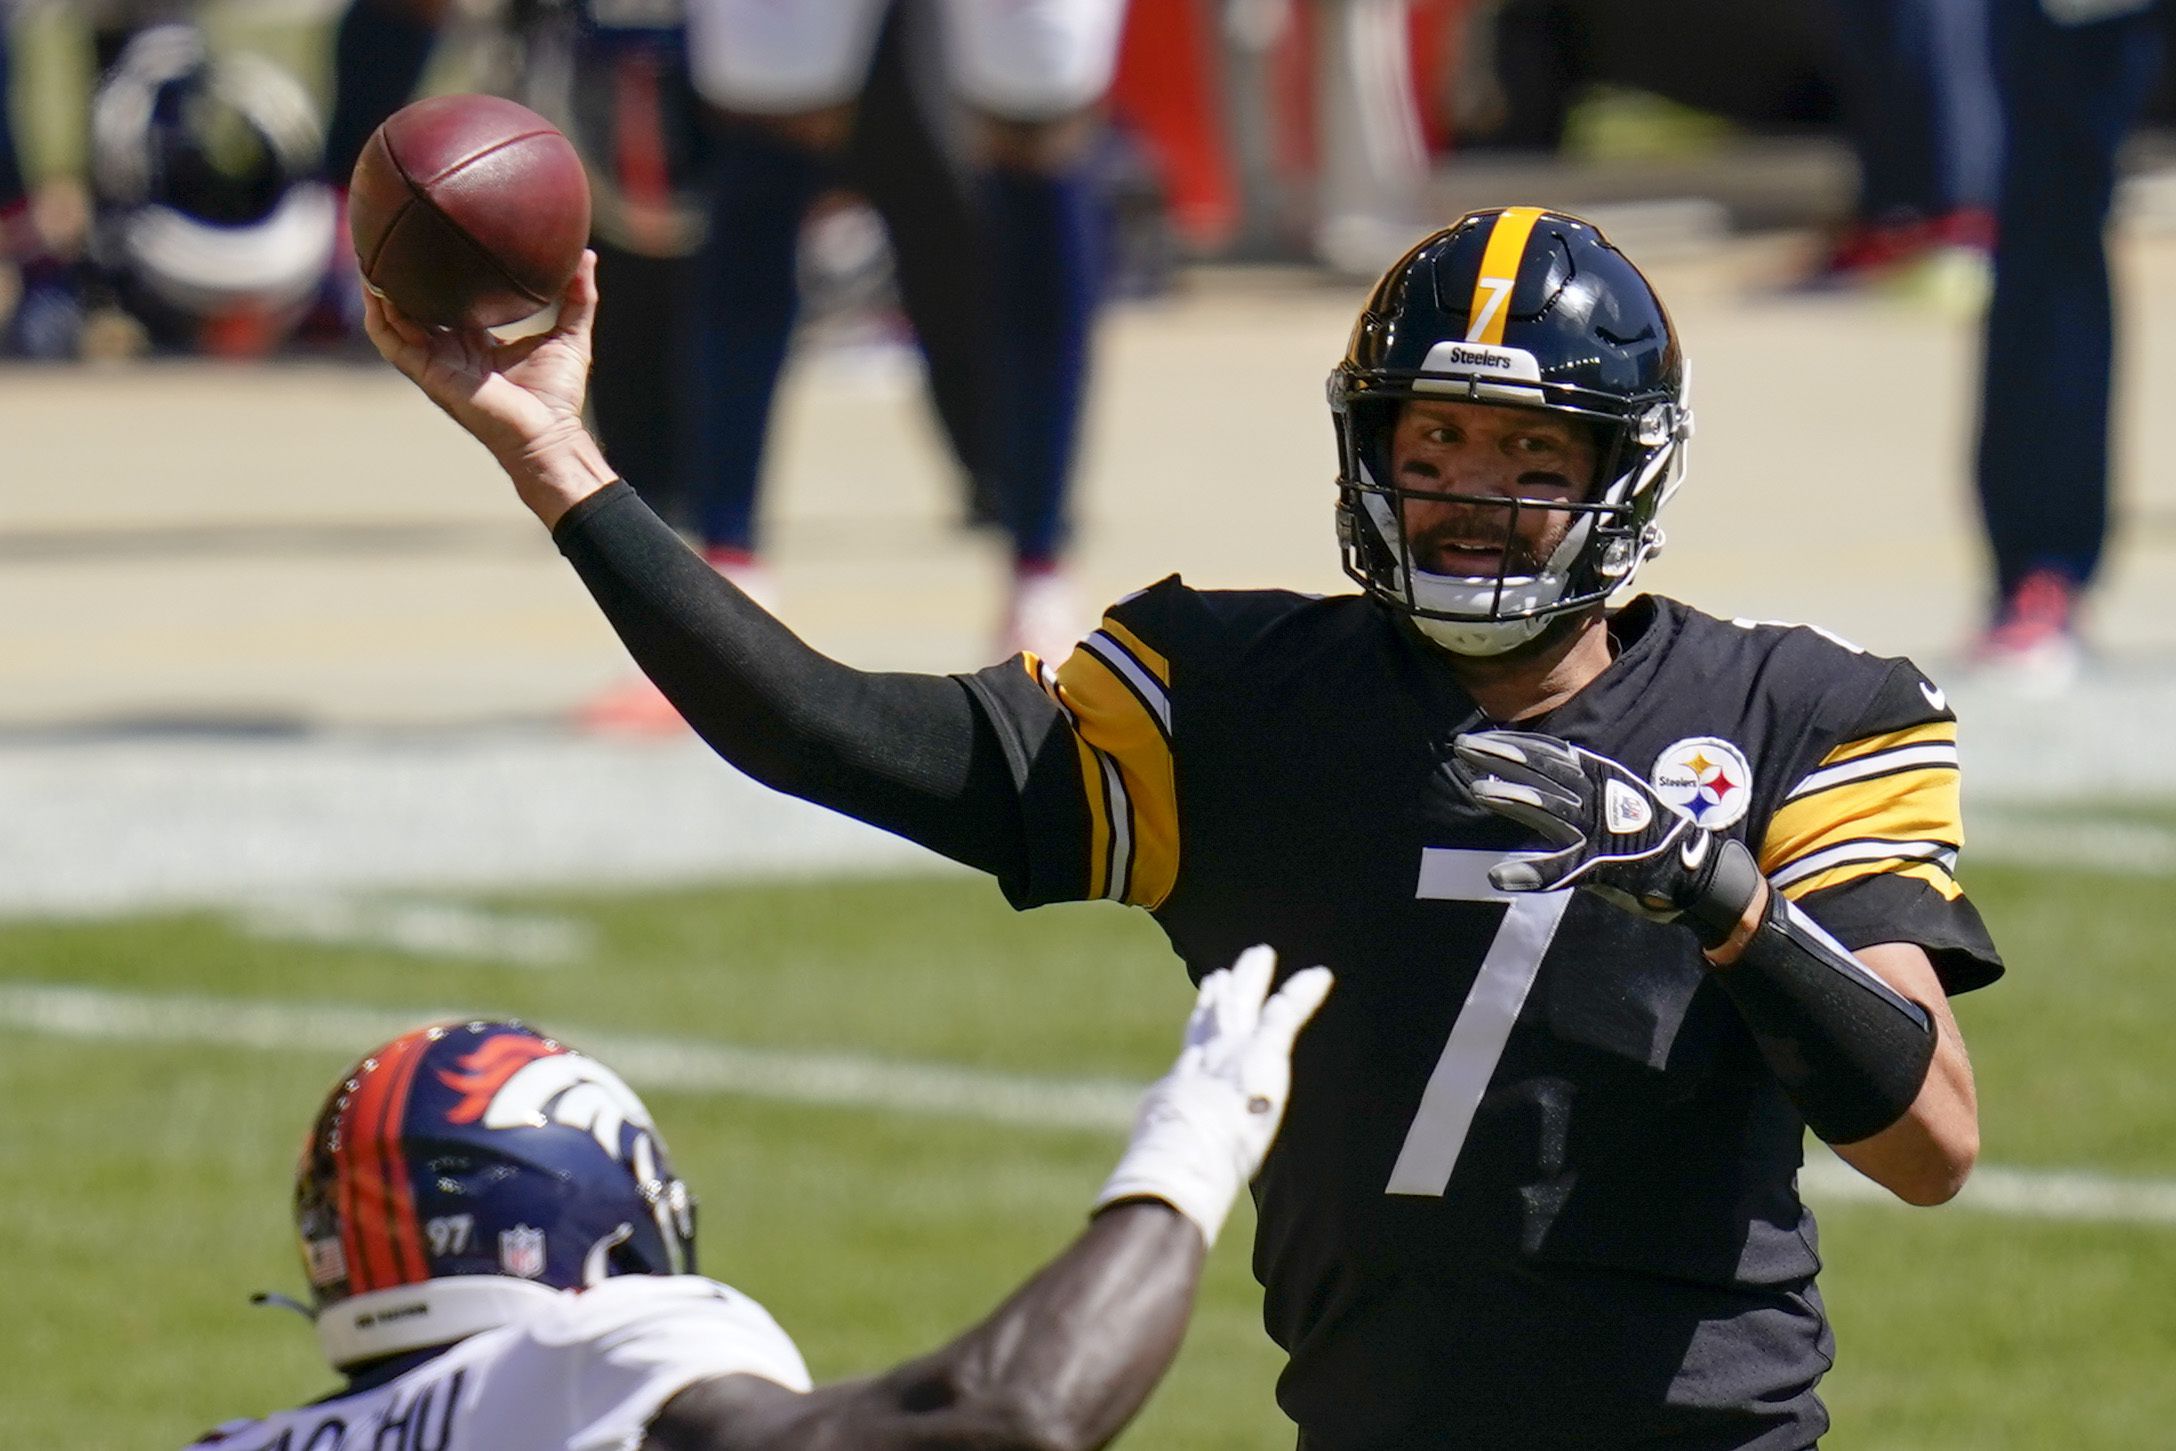 Houston Texans vs. Pittsburgh Steelers: How to watch NFL online